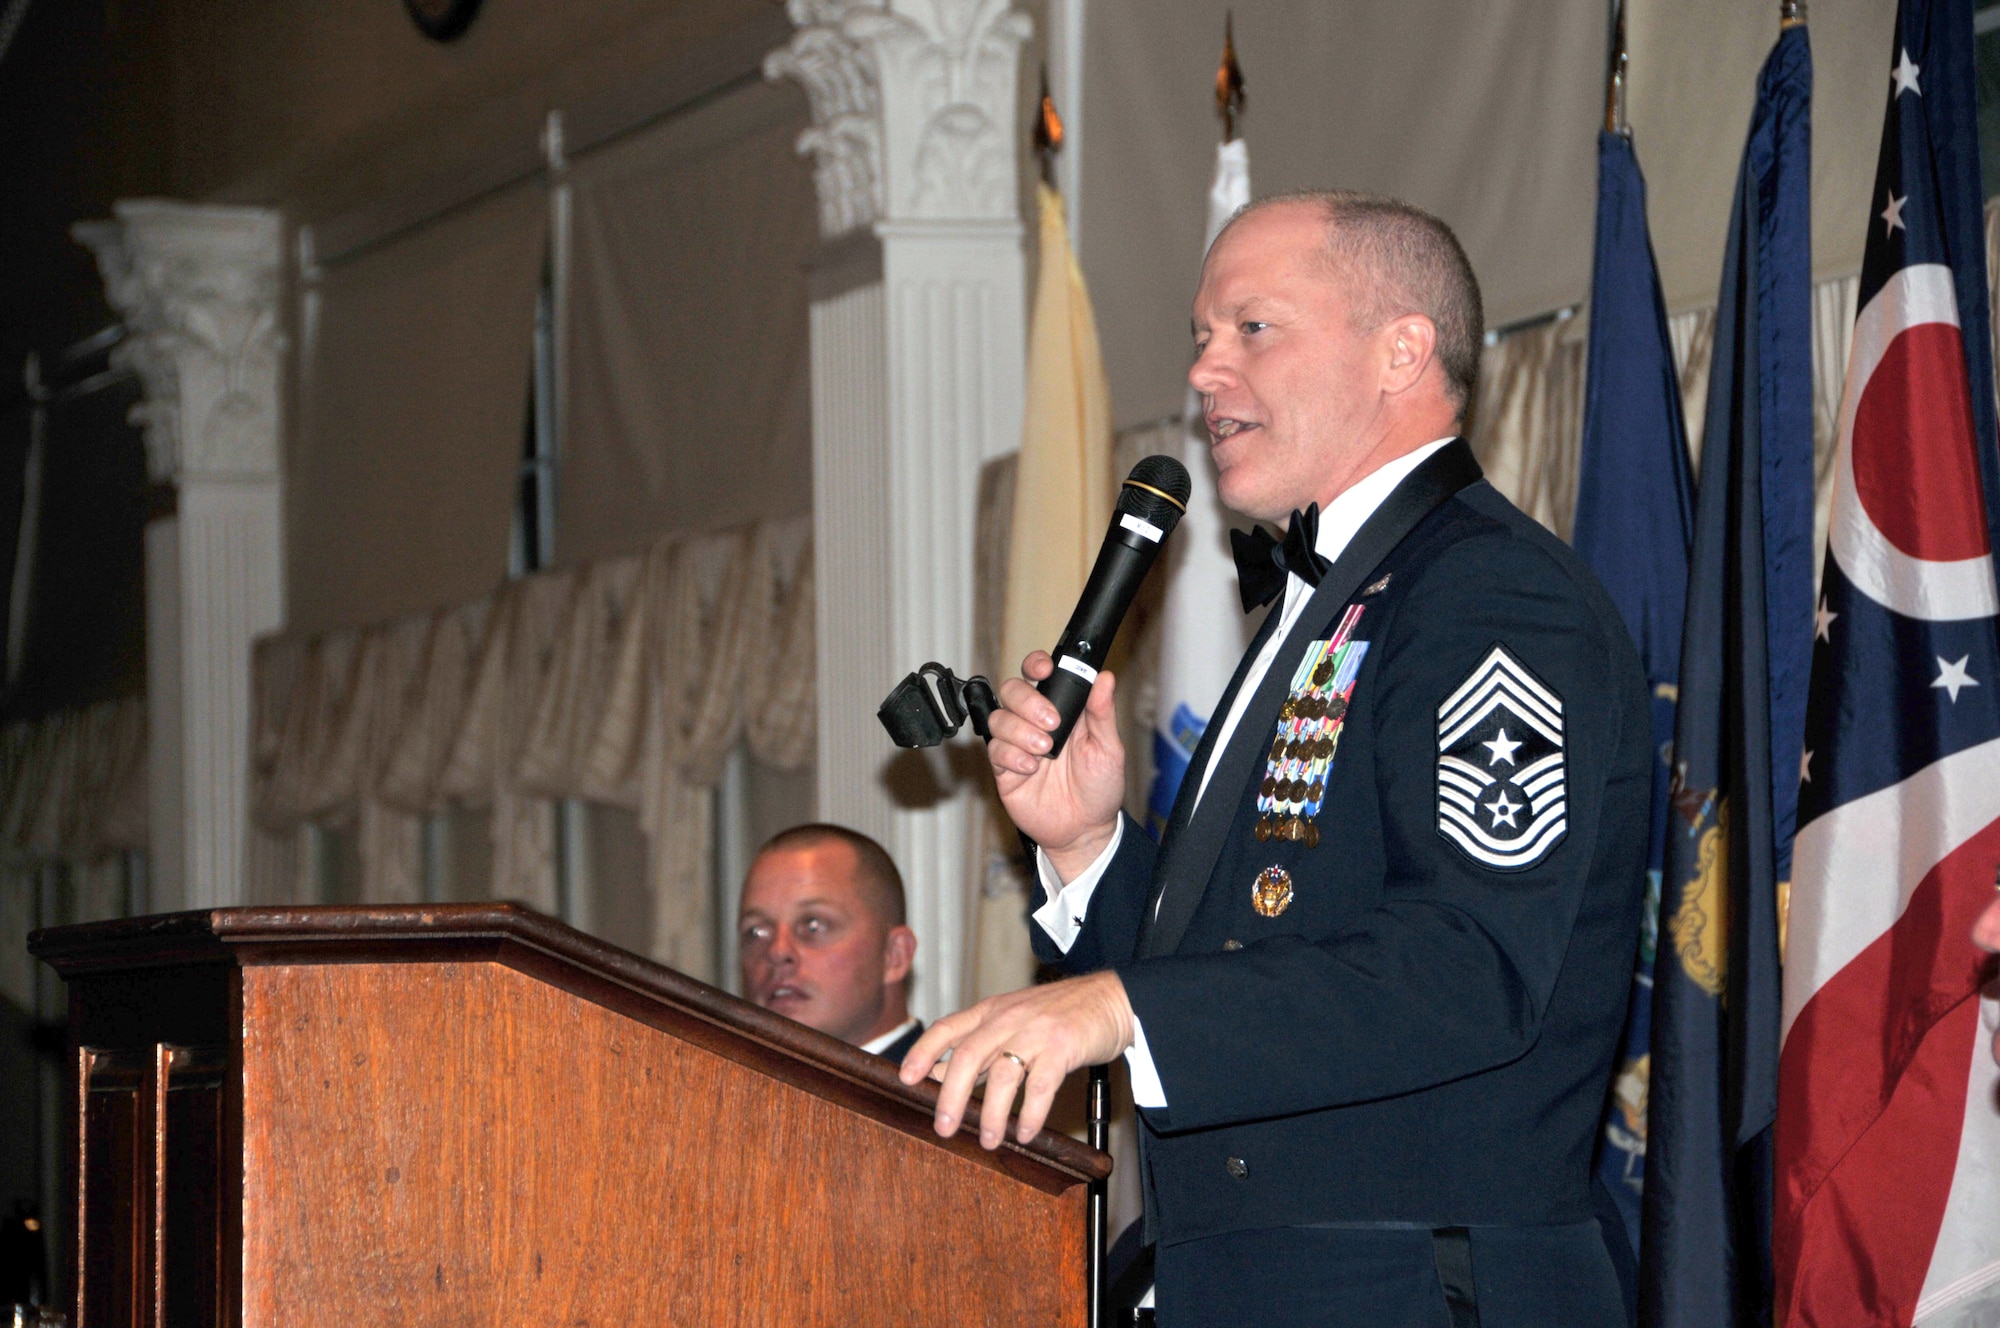 Command Chief Master Sgt. Christopher E. Muncy, tenth command chief master sergeant to the director of the Air National Guard Bureau, speaks to senior enlisted at the annual Senior Non-commissioned Officer/Chief Petty Officer Formal Dining-in, now in its 30th year. The event was held at the Aqua Turf in Plantsville, Conn. Oct. 6, 2011. (U.S. Air Force photo by Tech. Sgt. Joshua Mead)